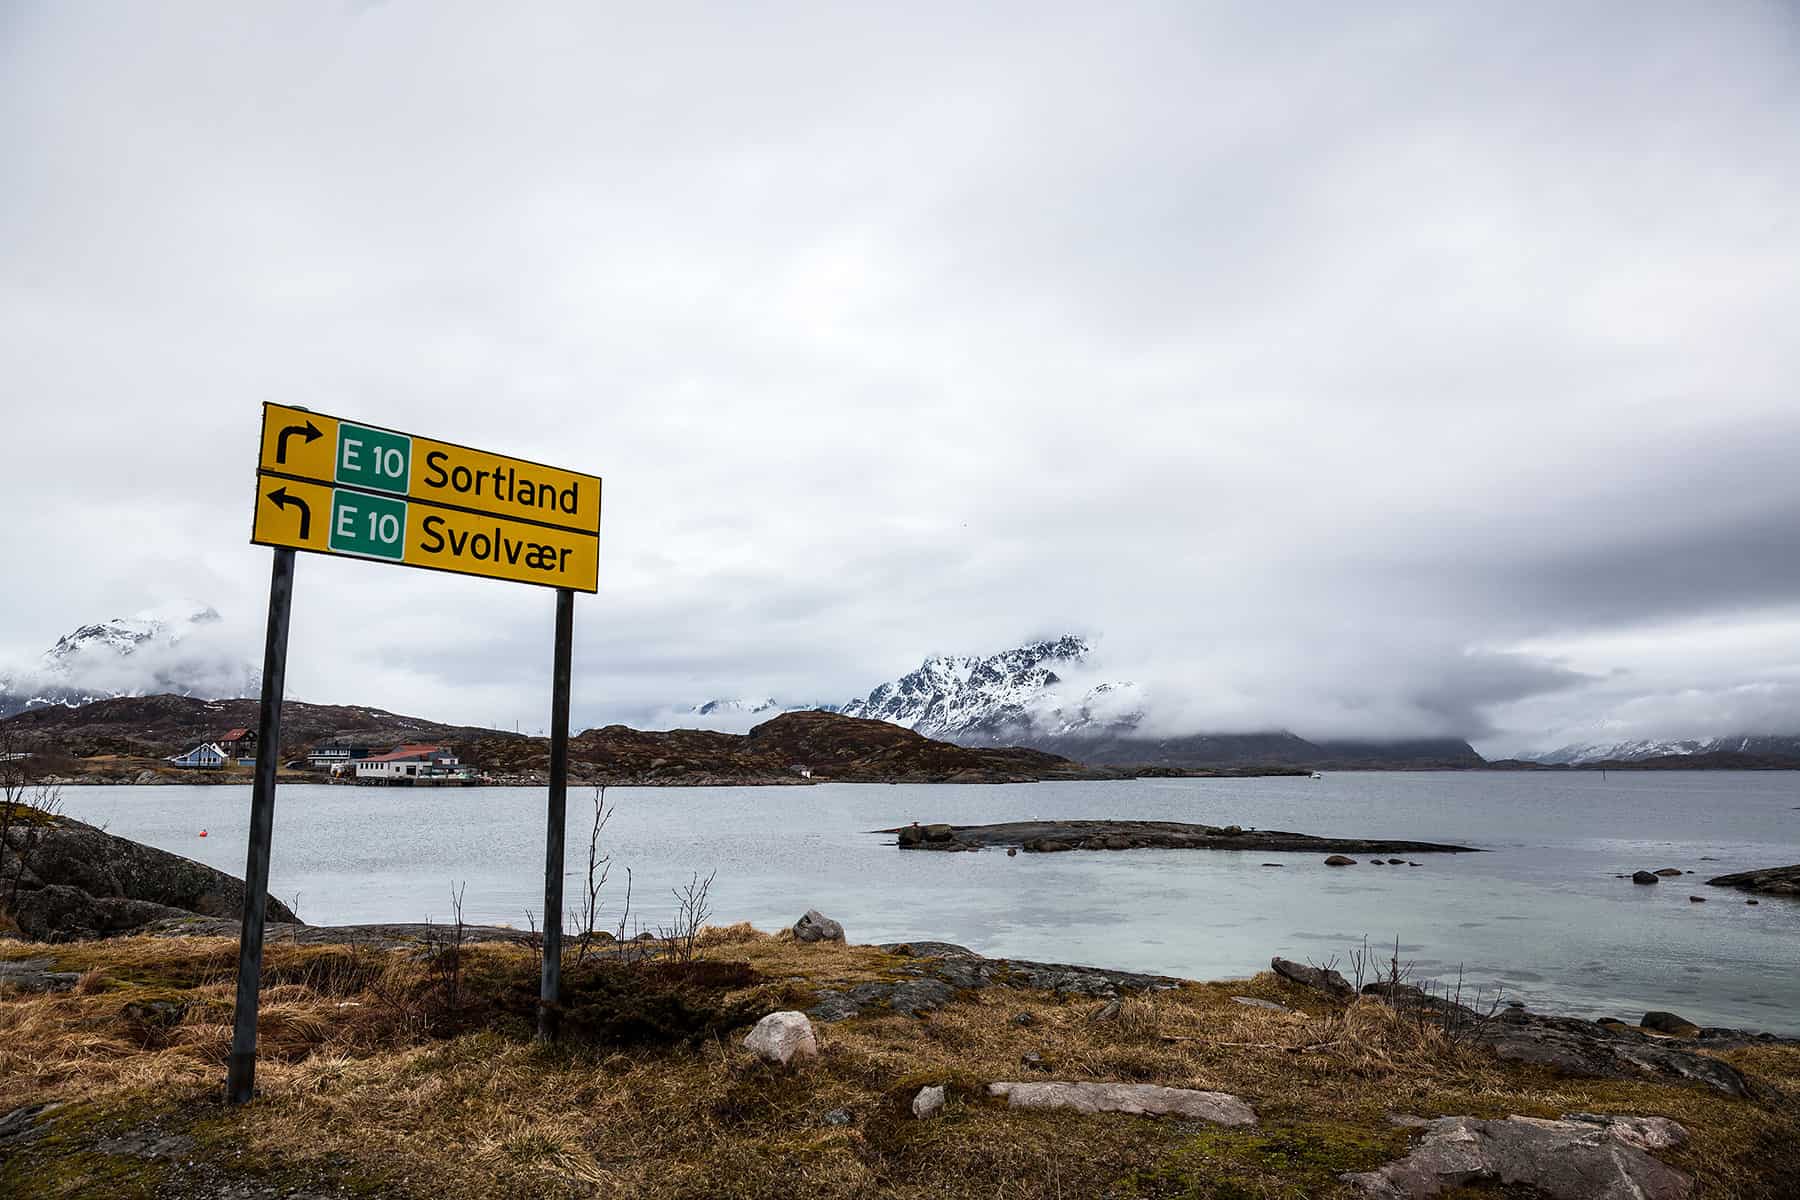 The road E10 connects the Lofoten islands to the mainland.